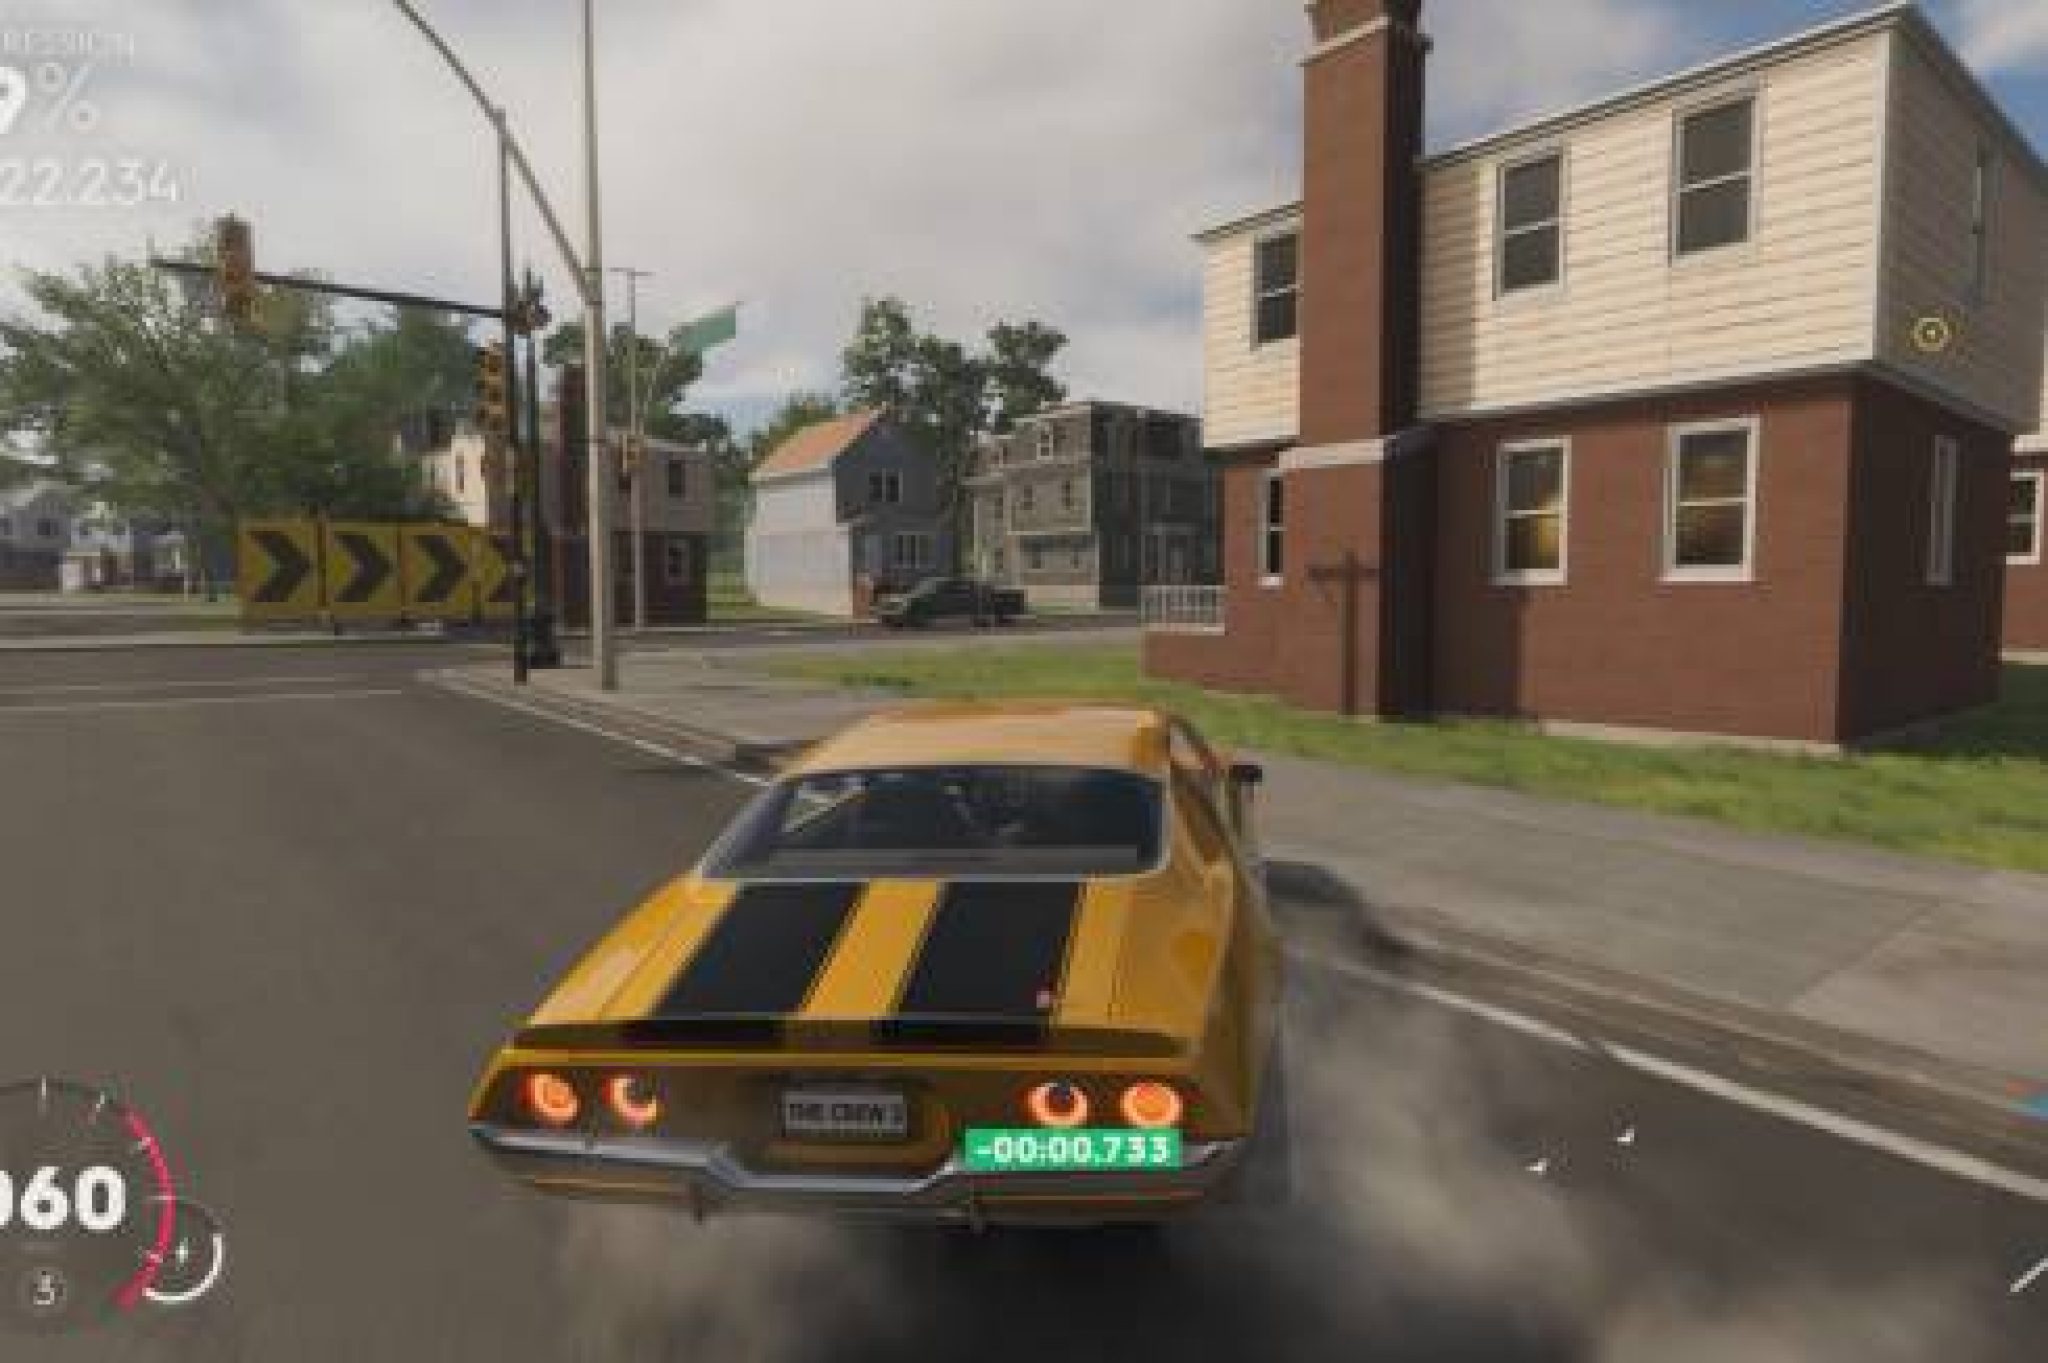 the crew 2 pc highly compressed